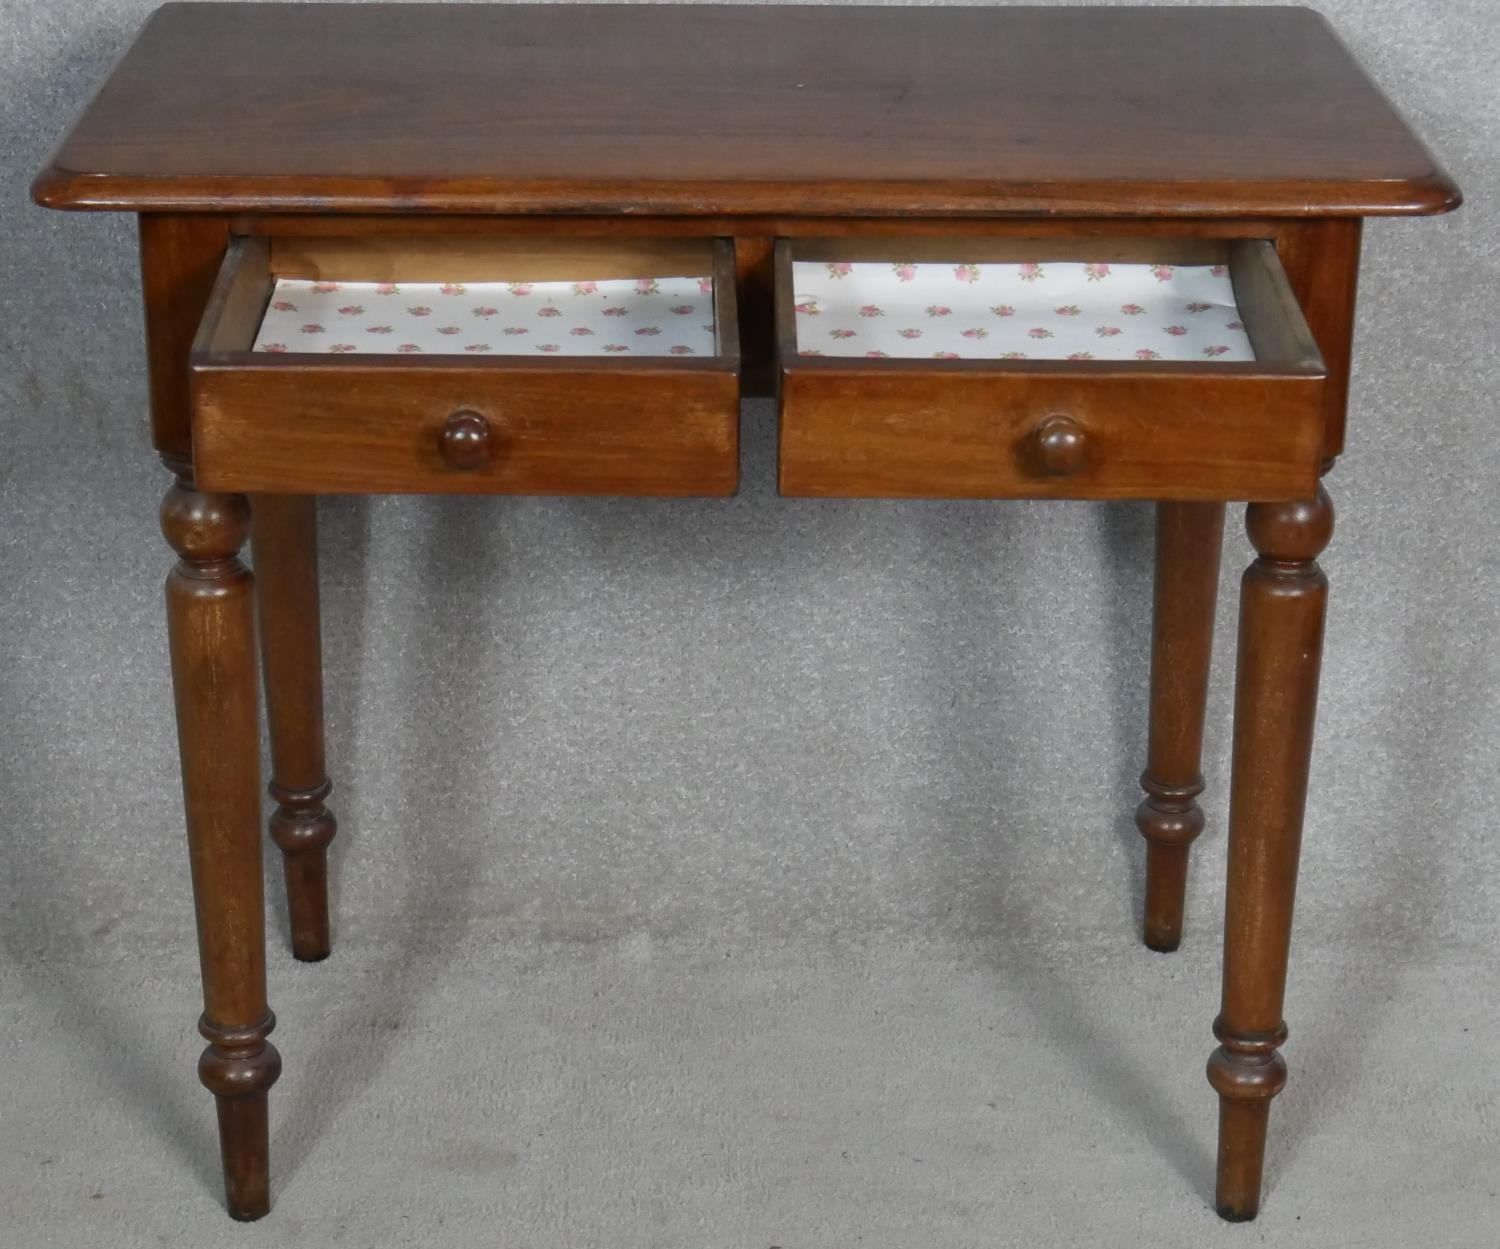 A 19th century mahogany hall table with frieze drawers on turned tapering supports. H.73 W.83.5 D. - Image 2 of 4